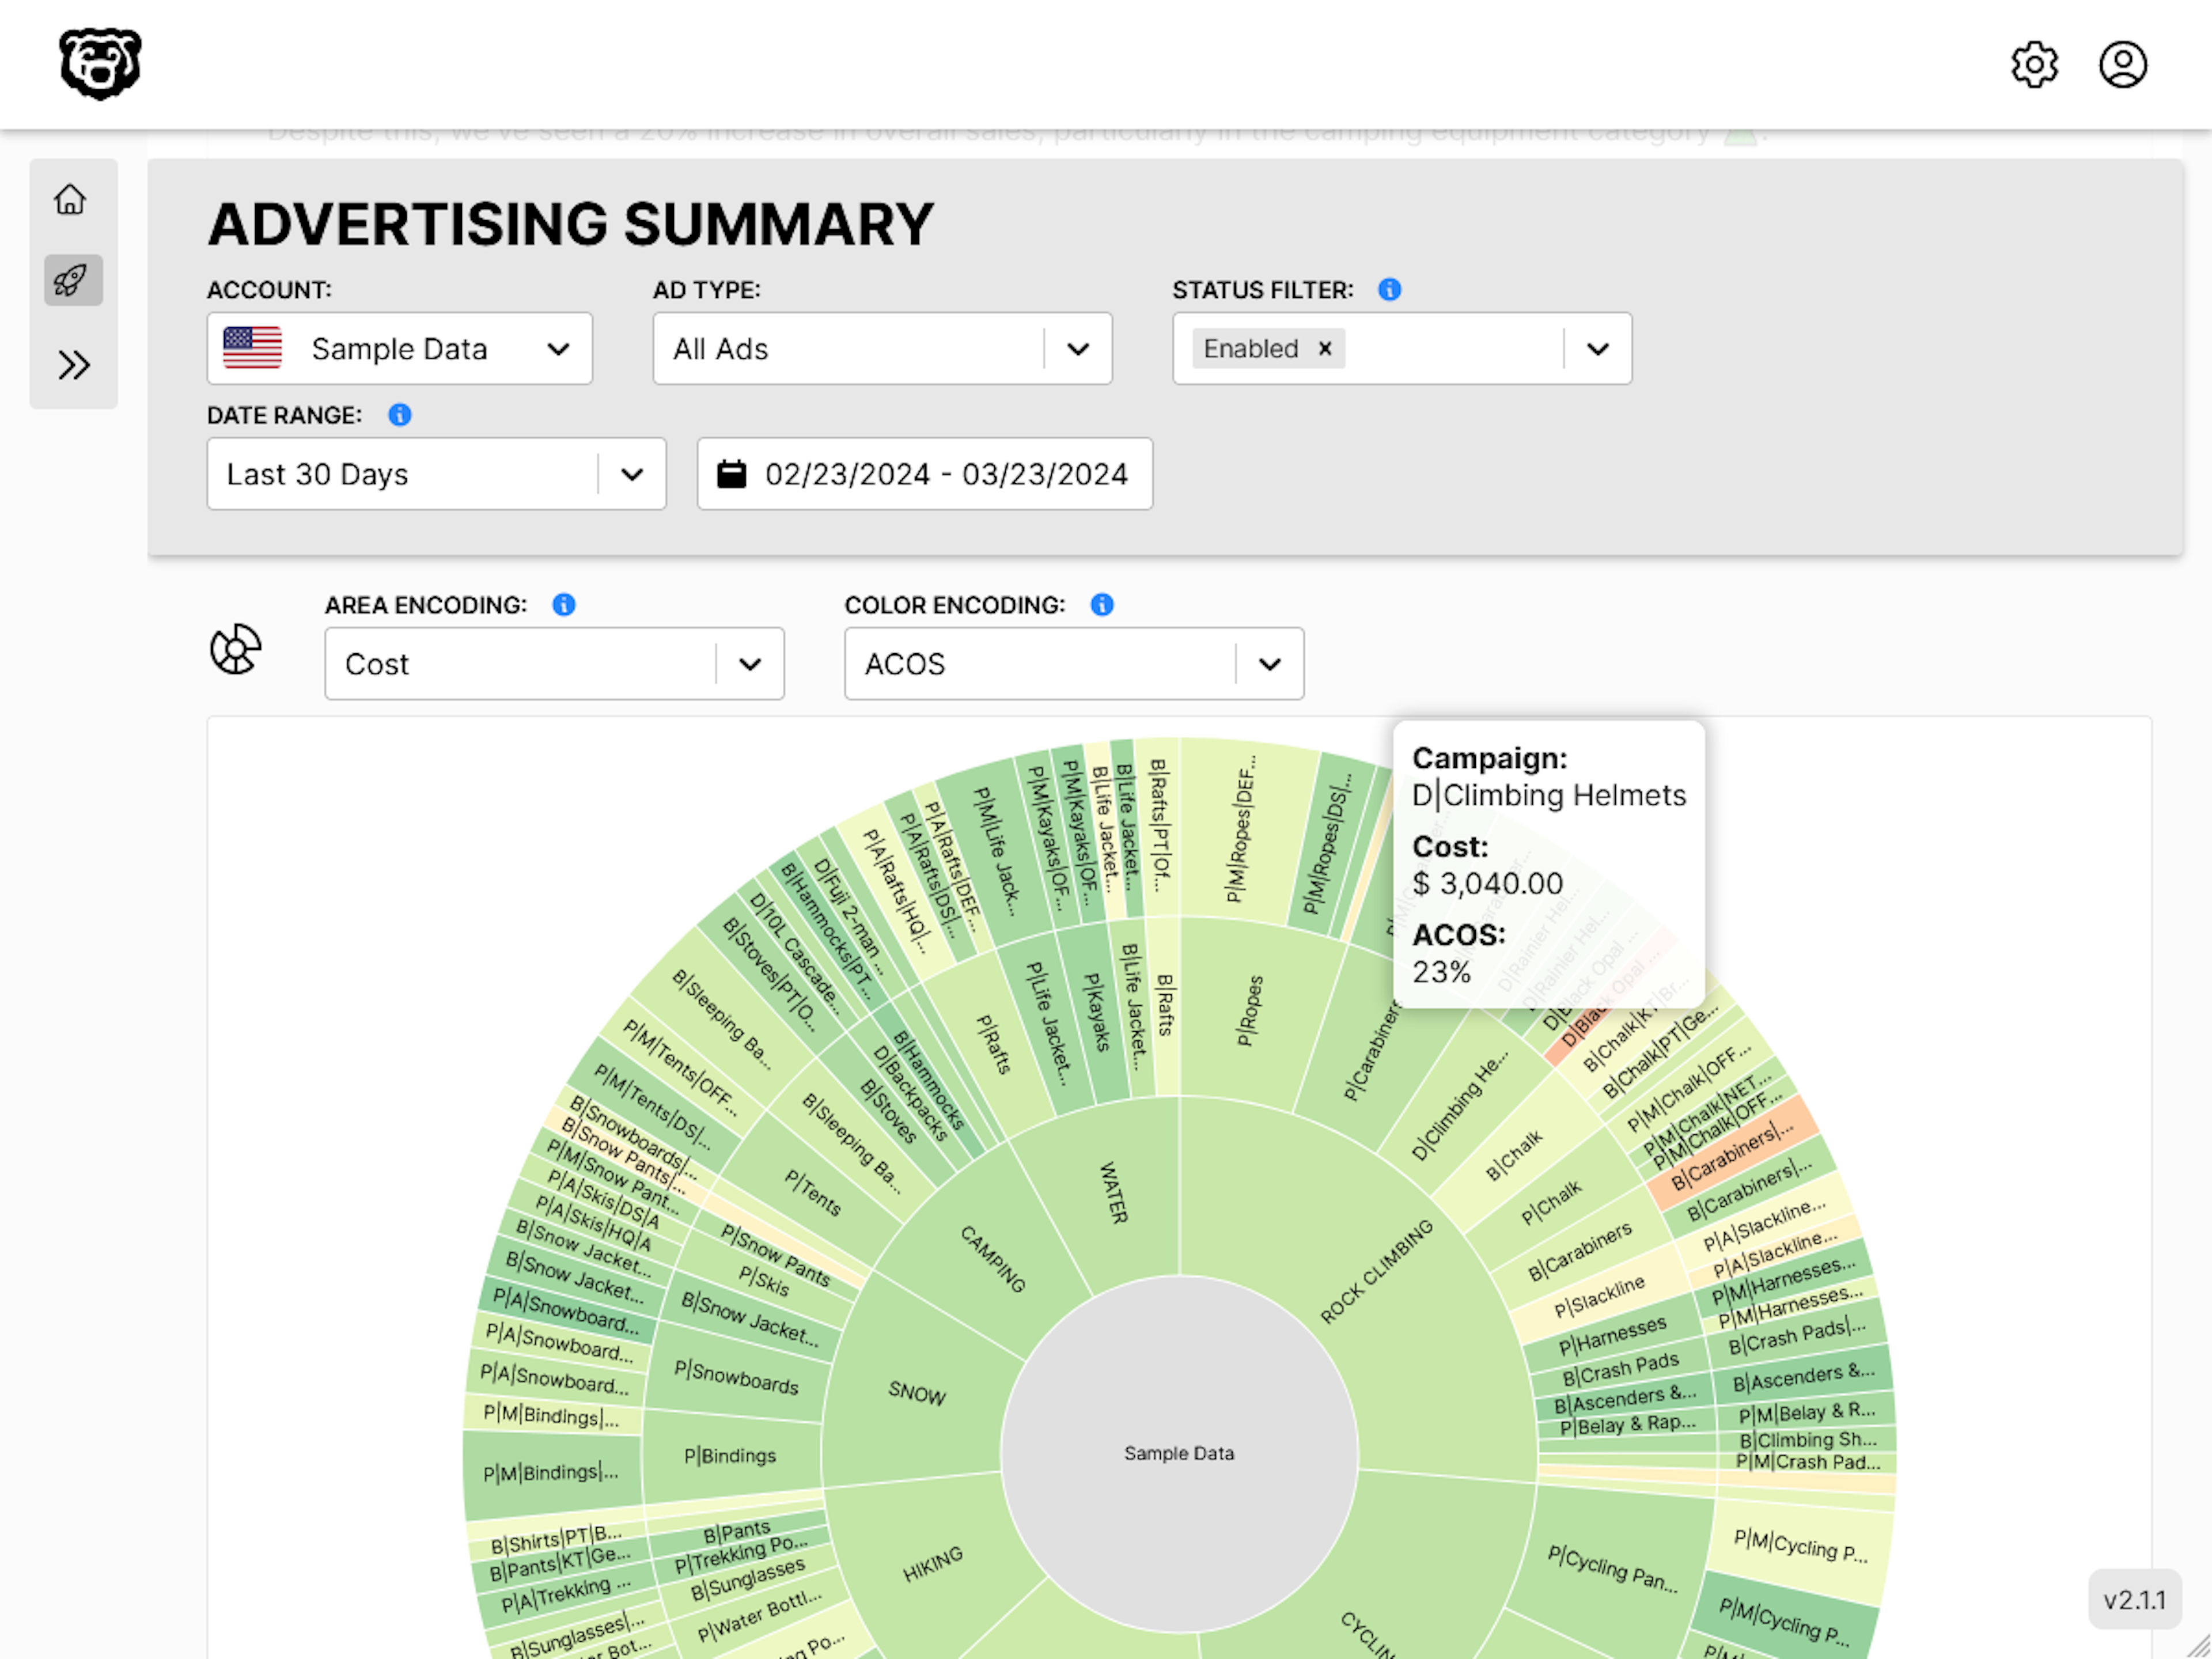 advertising summary report screenshot showing a sunburst chart that shows the relationship and performance of all advertising adgroups, campaigns and portfolios at once.